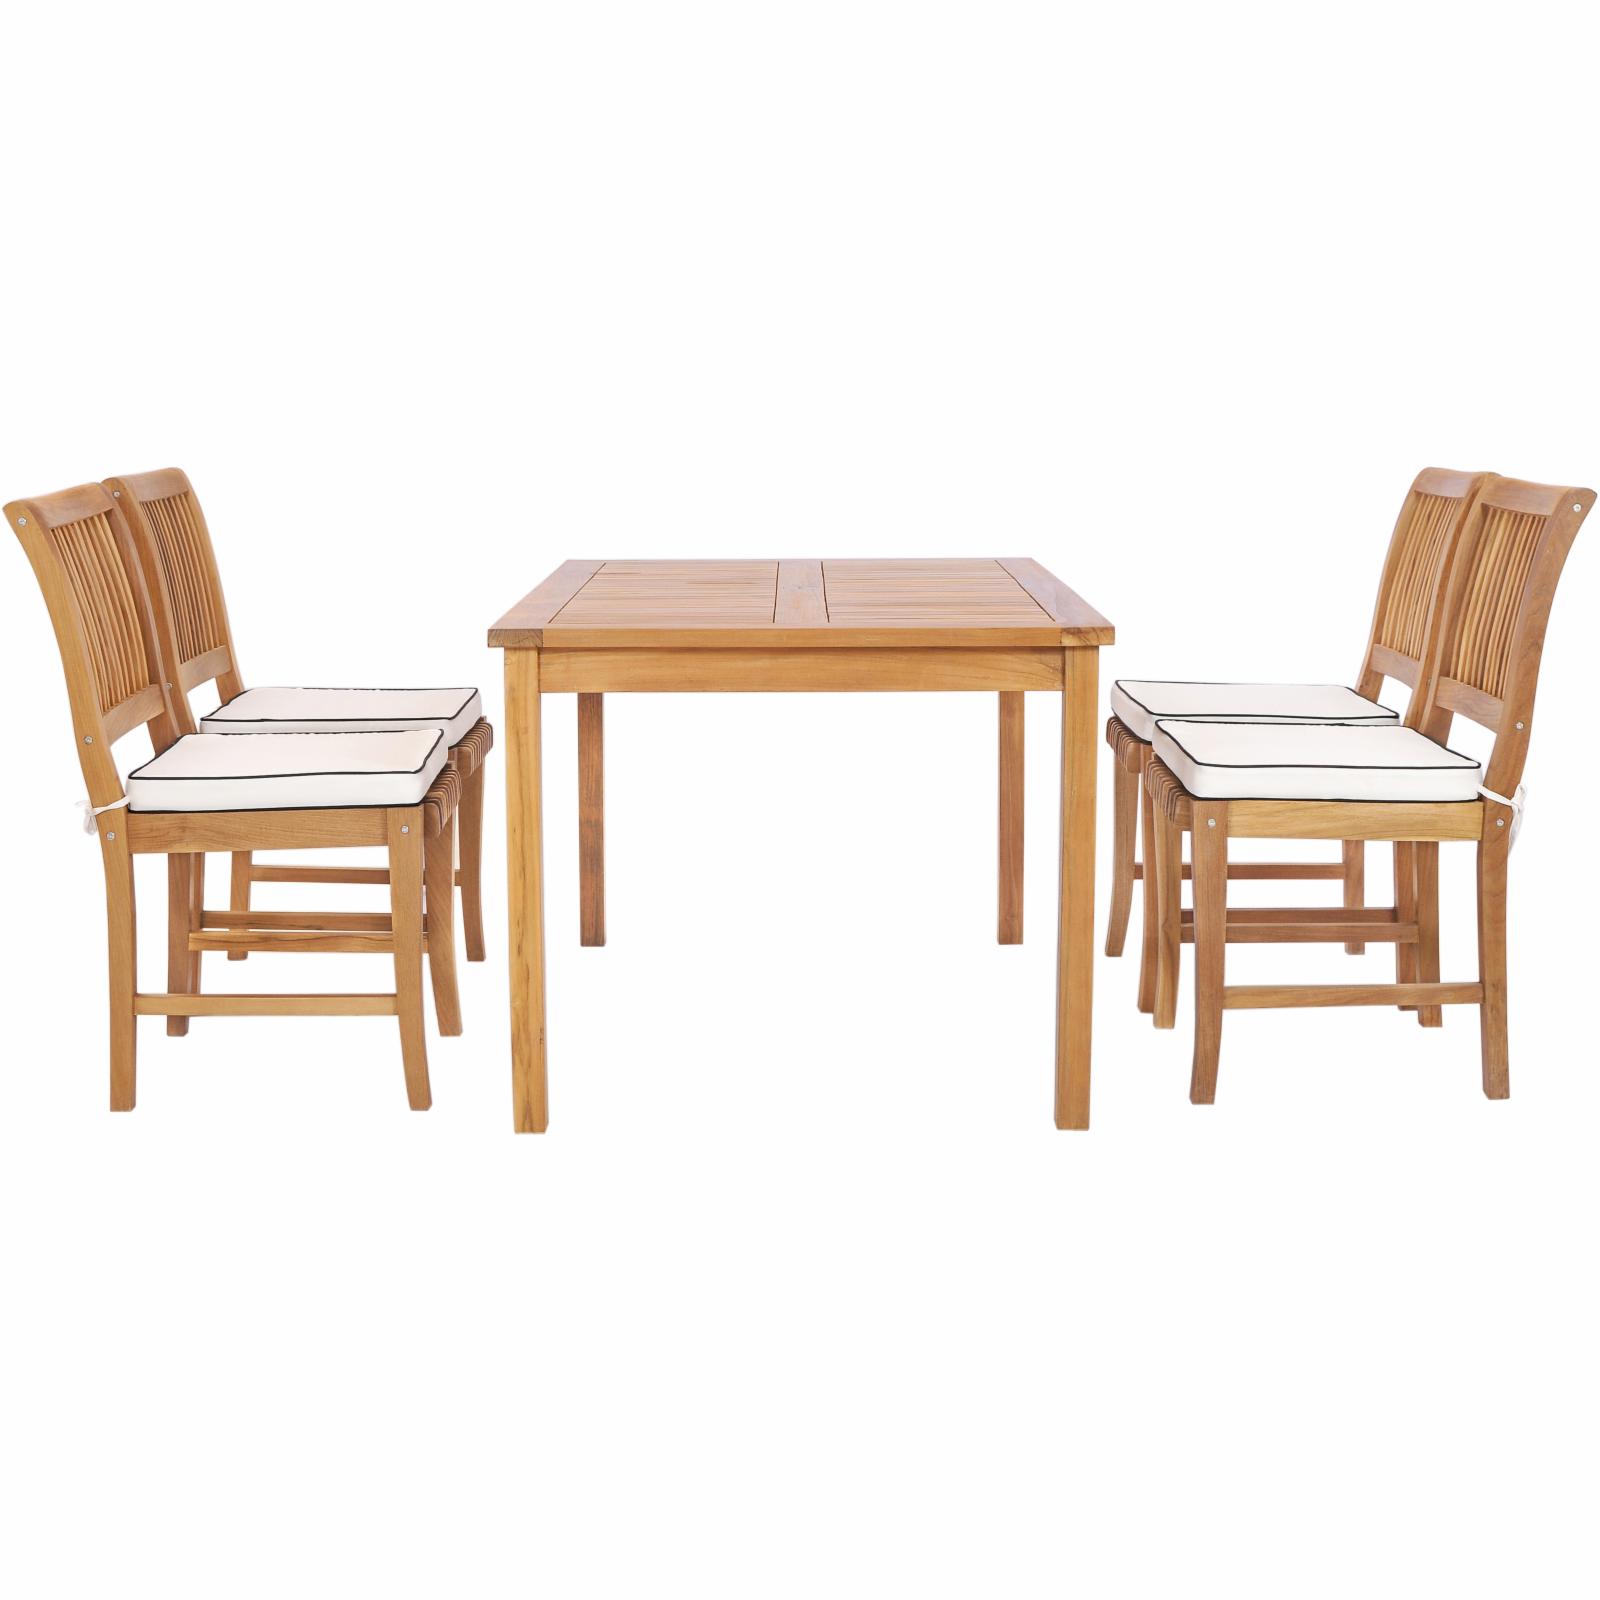 Chic Teak Bermuda 5 Piece Teak Wood Patio Dining Set with Side Chairs - image 2 of 5